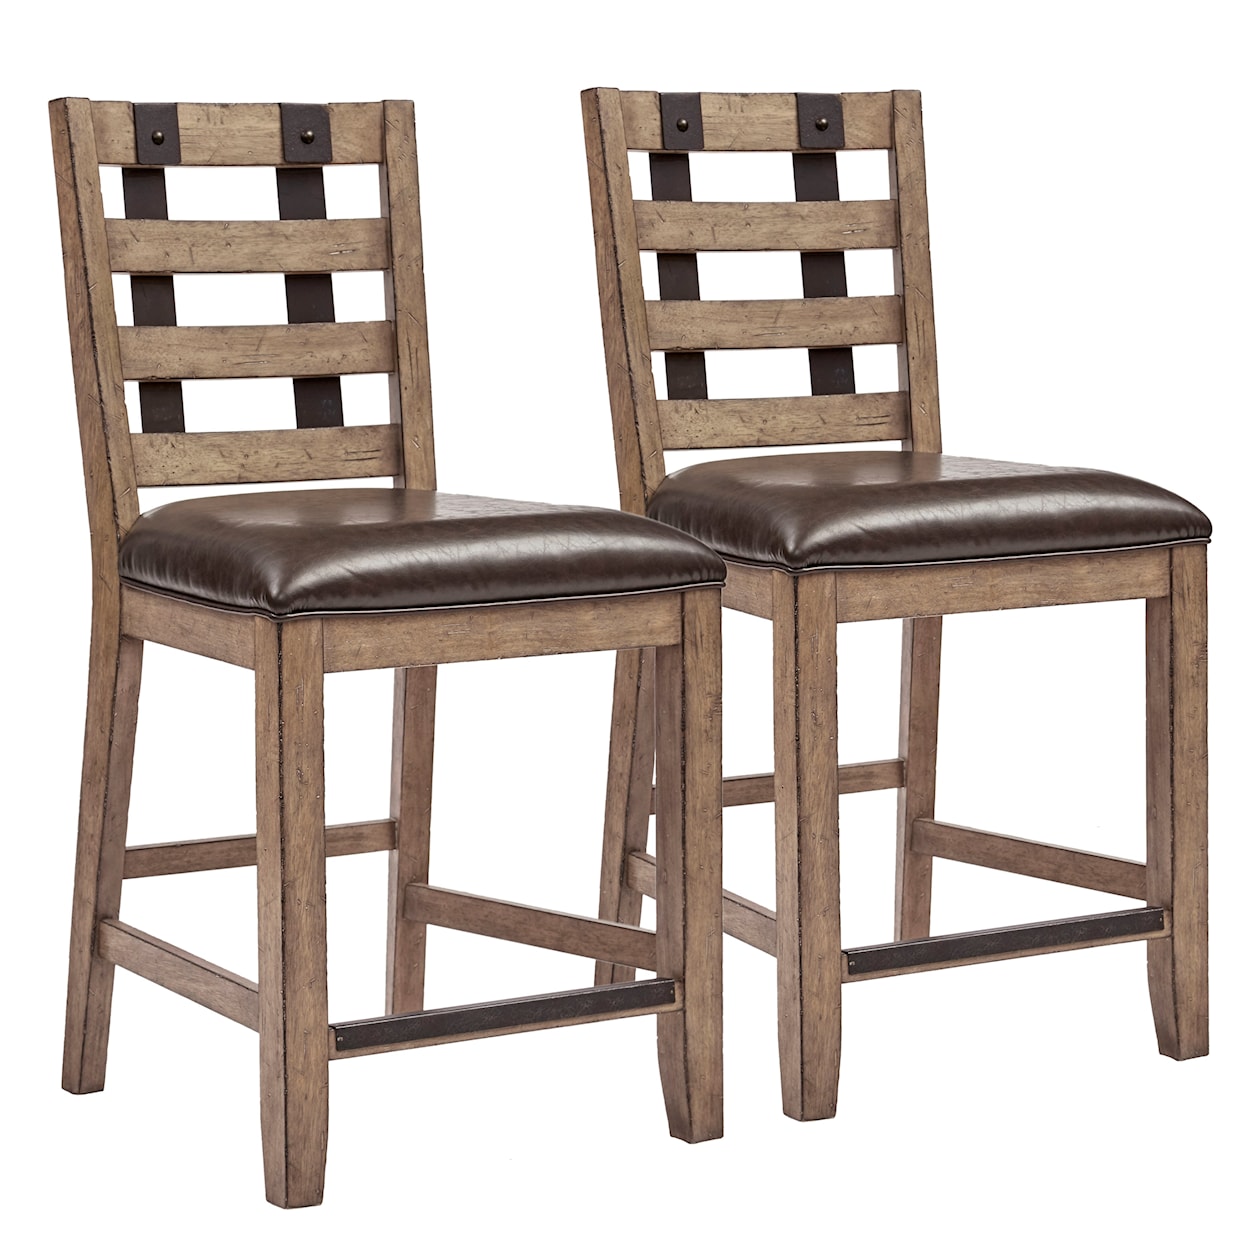 Accentrics Home Dining Dining Chair